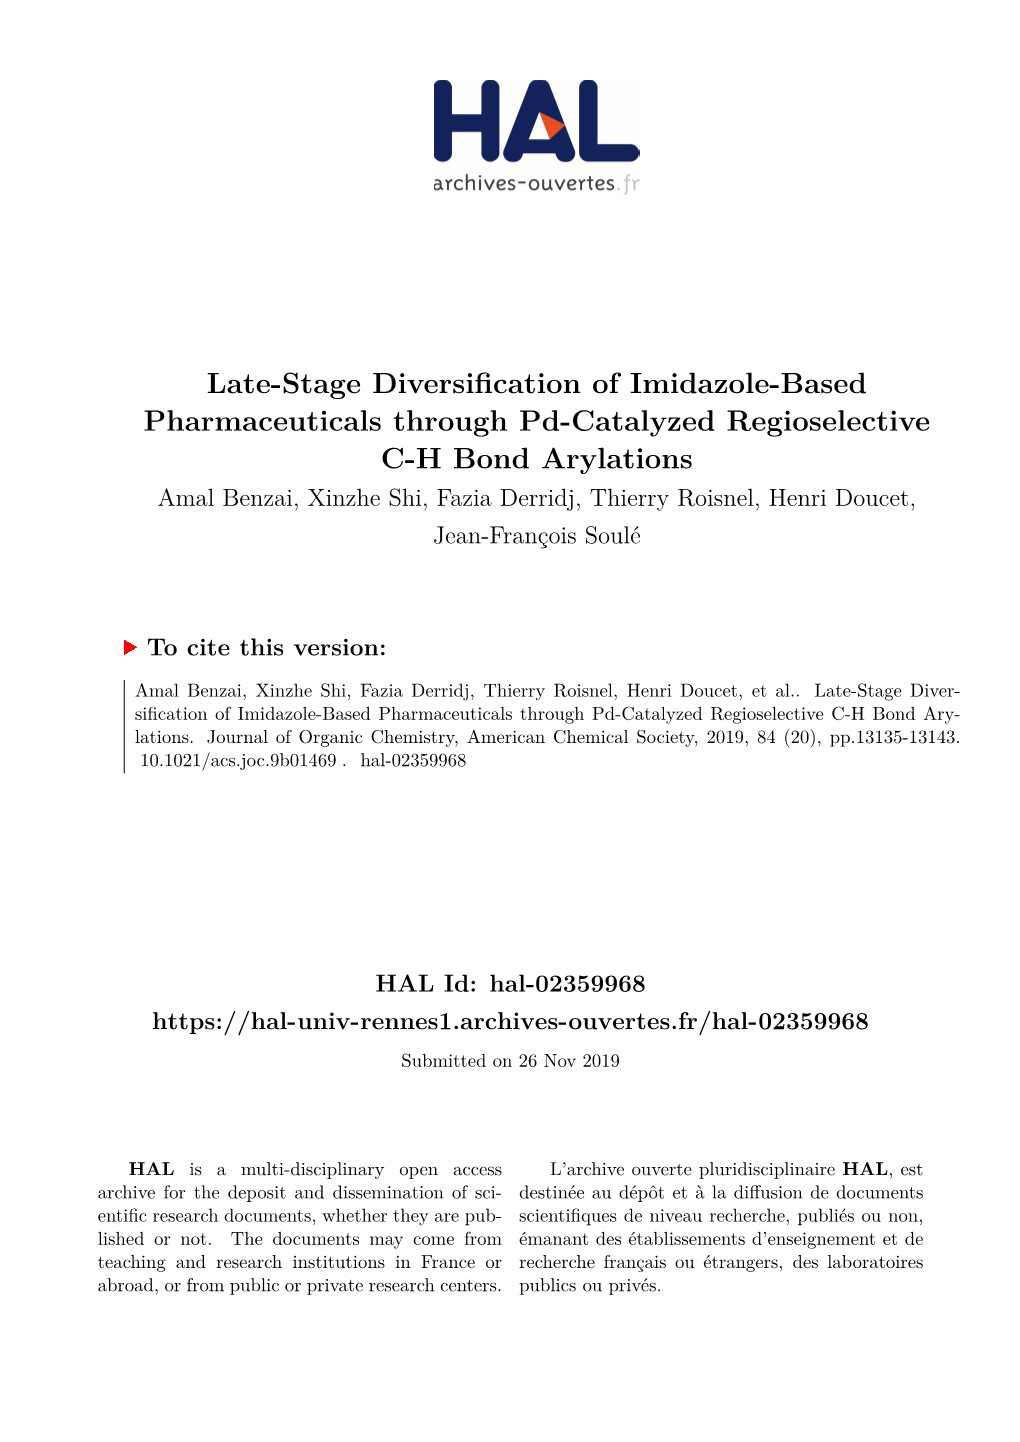 Late-Stage Diversification of Imidazole-Based Pharmaceuticals Through